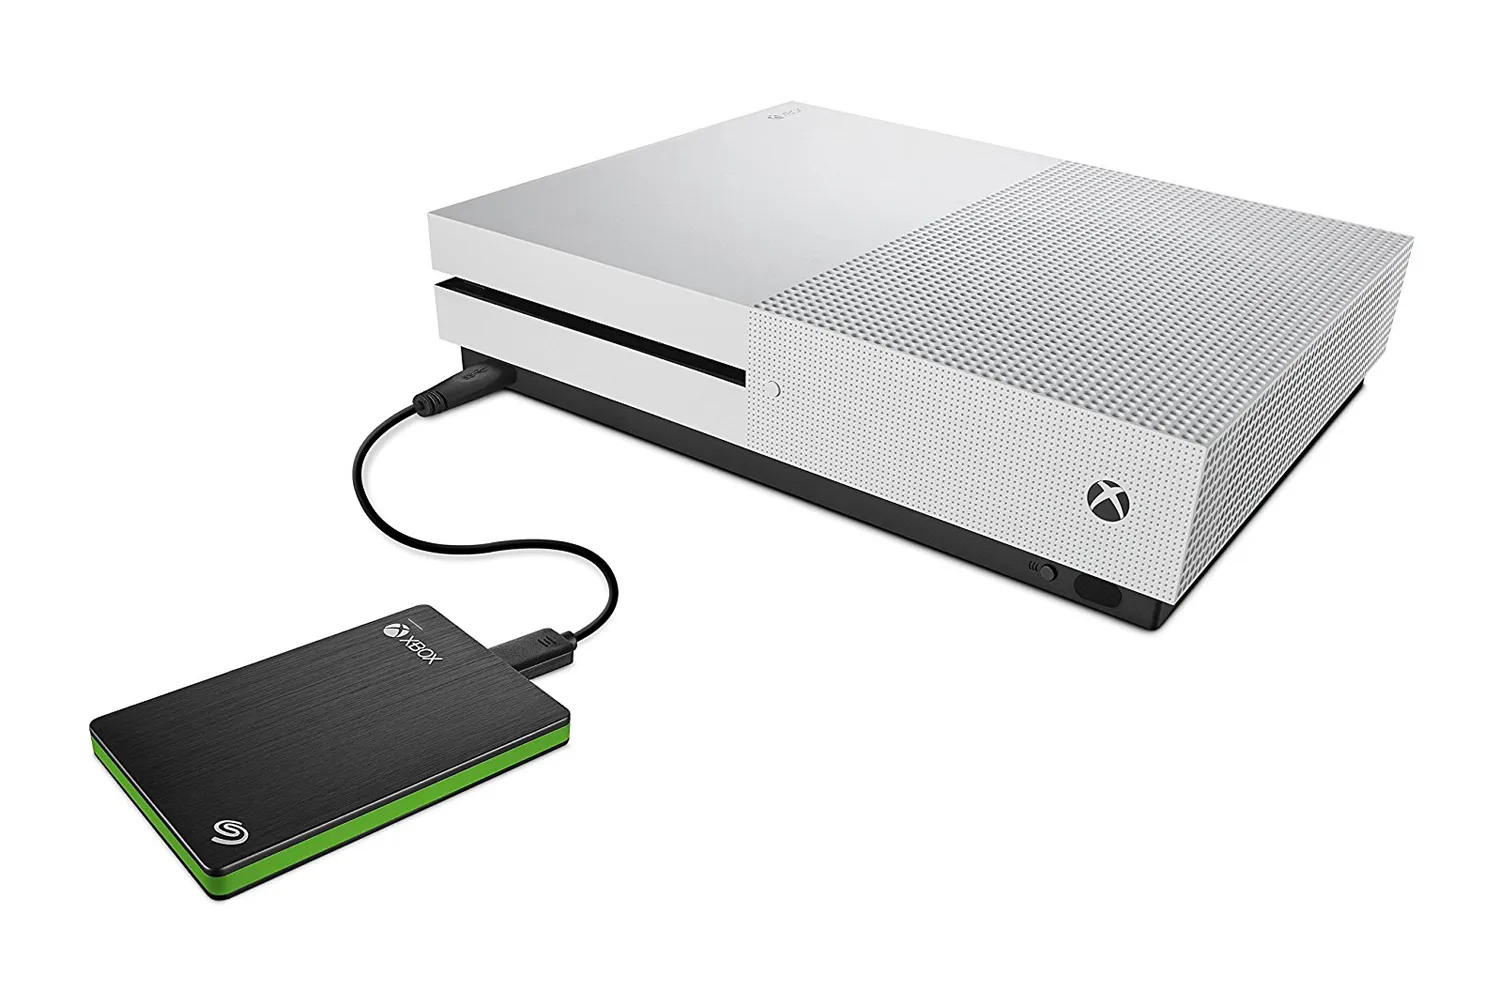 What Solid State Drive Should I Buy For My Xbox One